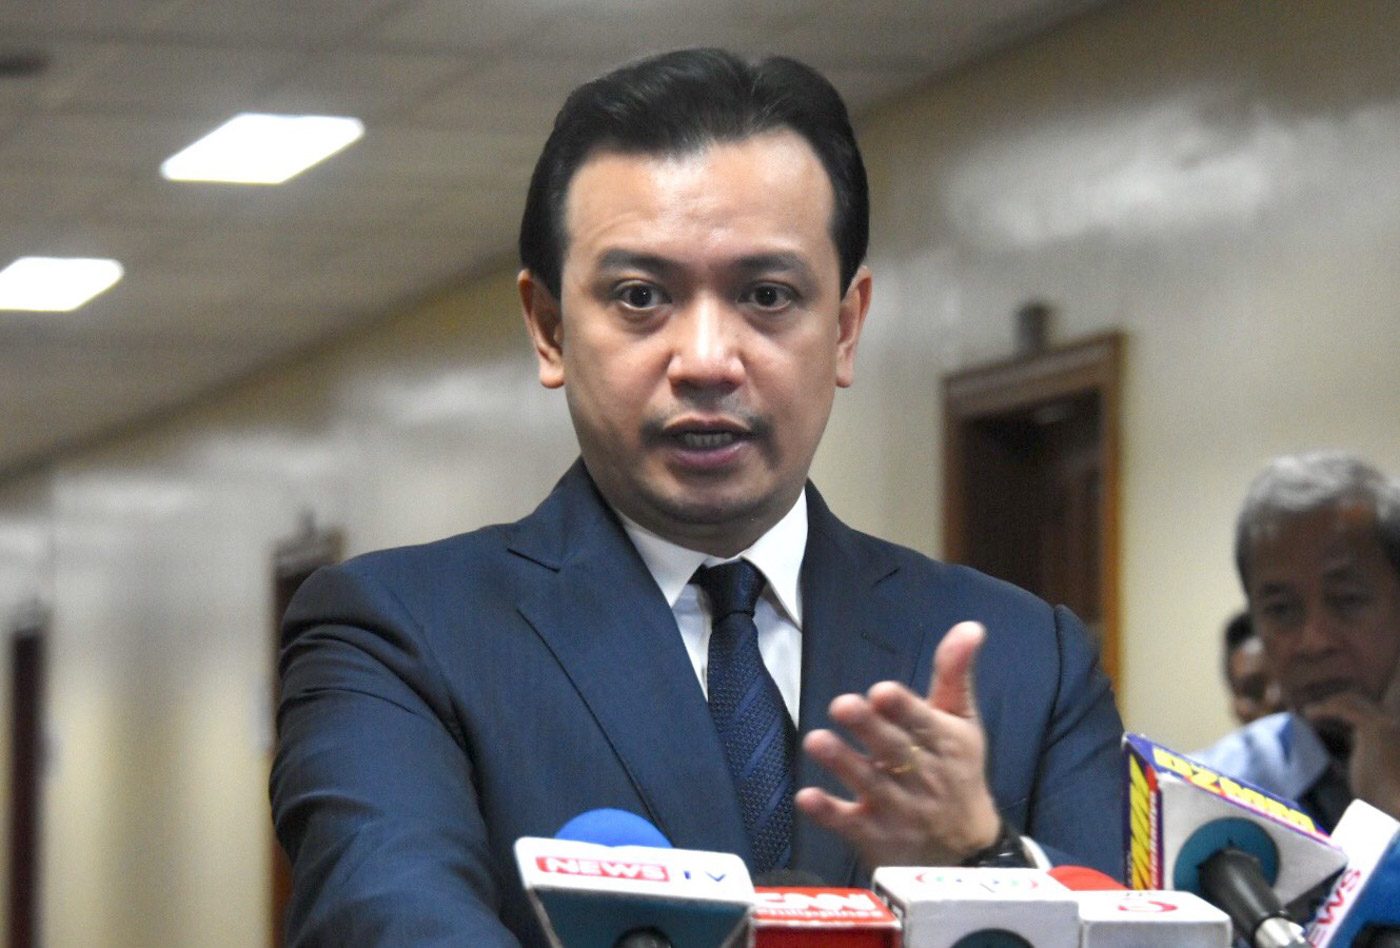 Trillanes accuses Calida of ‘stealing’ his amnesty application documents